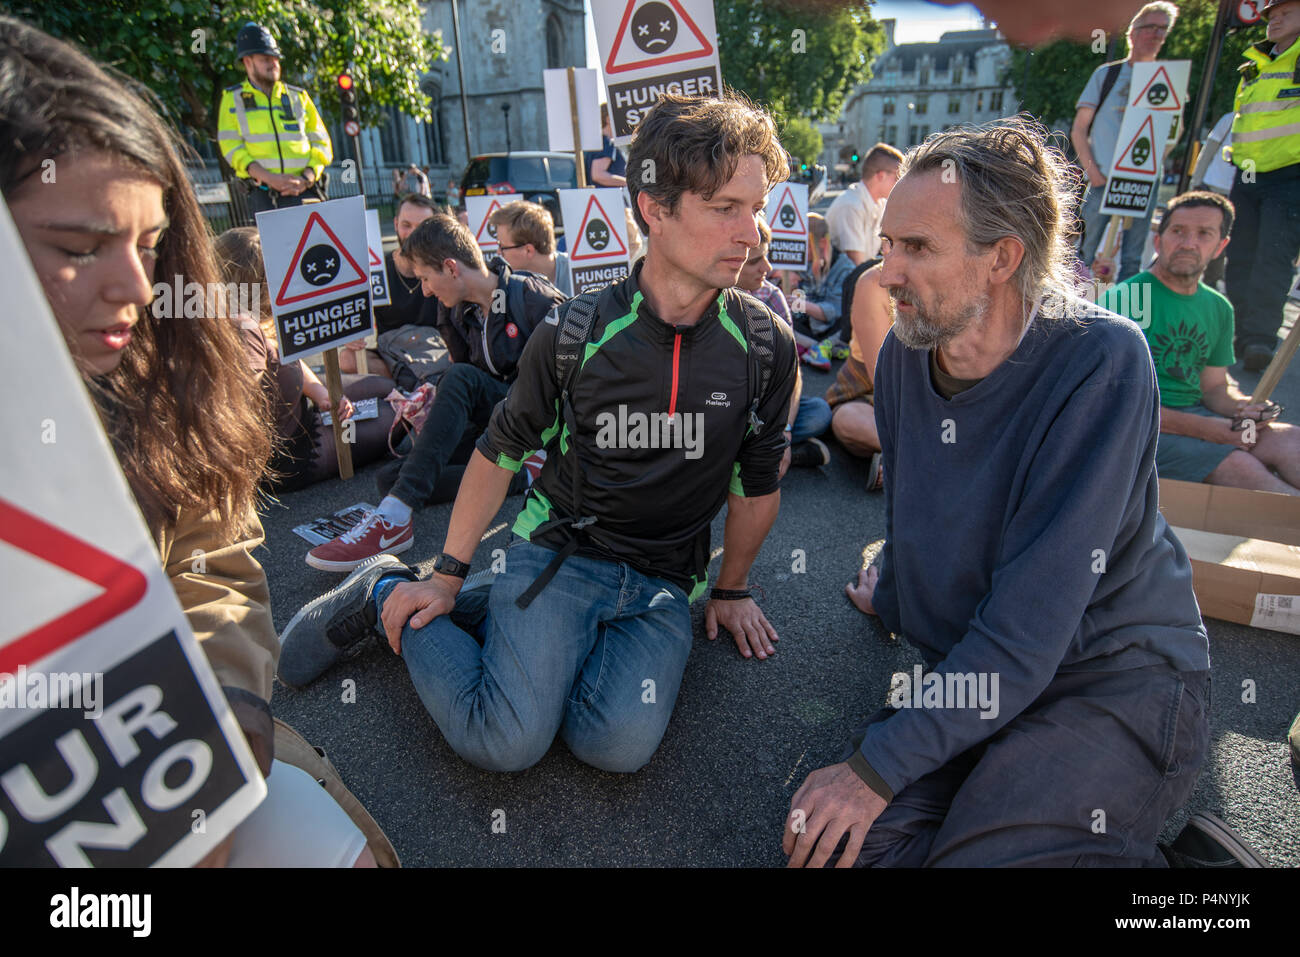 London, UK. 22nd June 2018. Campaigners. including Roger Hallam (right)  against the expansion of Heathrow sit down in the road and block traffic in Parliament Square for 30 minutes holding a banner and placards against Heathrow expansion. Those taking part included some who have been on hunger strike outside the Labour Party HQ for 14 days so far. Police told the protesters individually they risked arrest and removal for obstruction of the highway, but they left after 30 minutes without any arrests. Credit: Peter Marshall/Alamy Live News Stock Photo